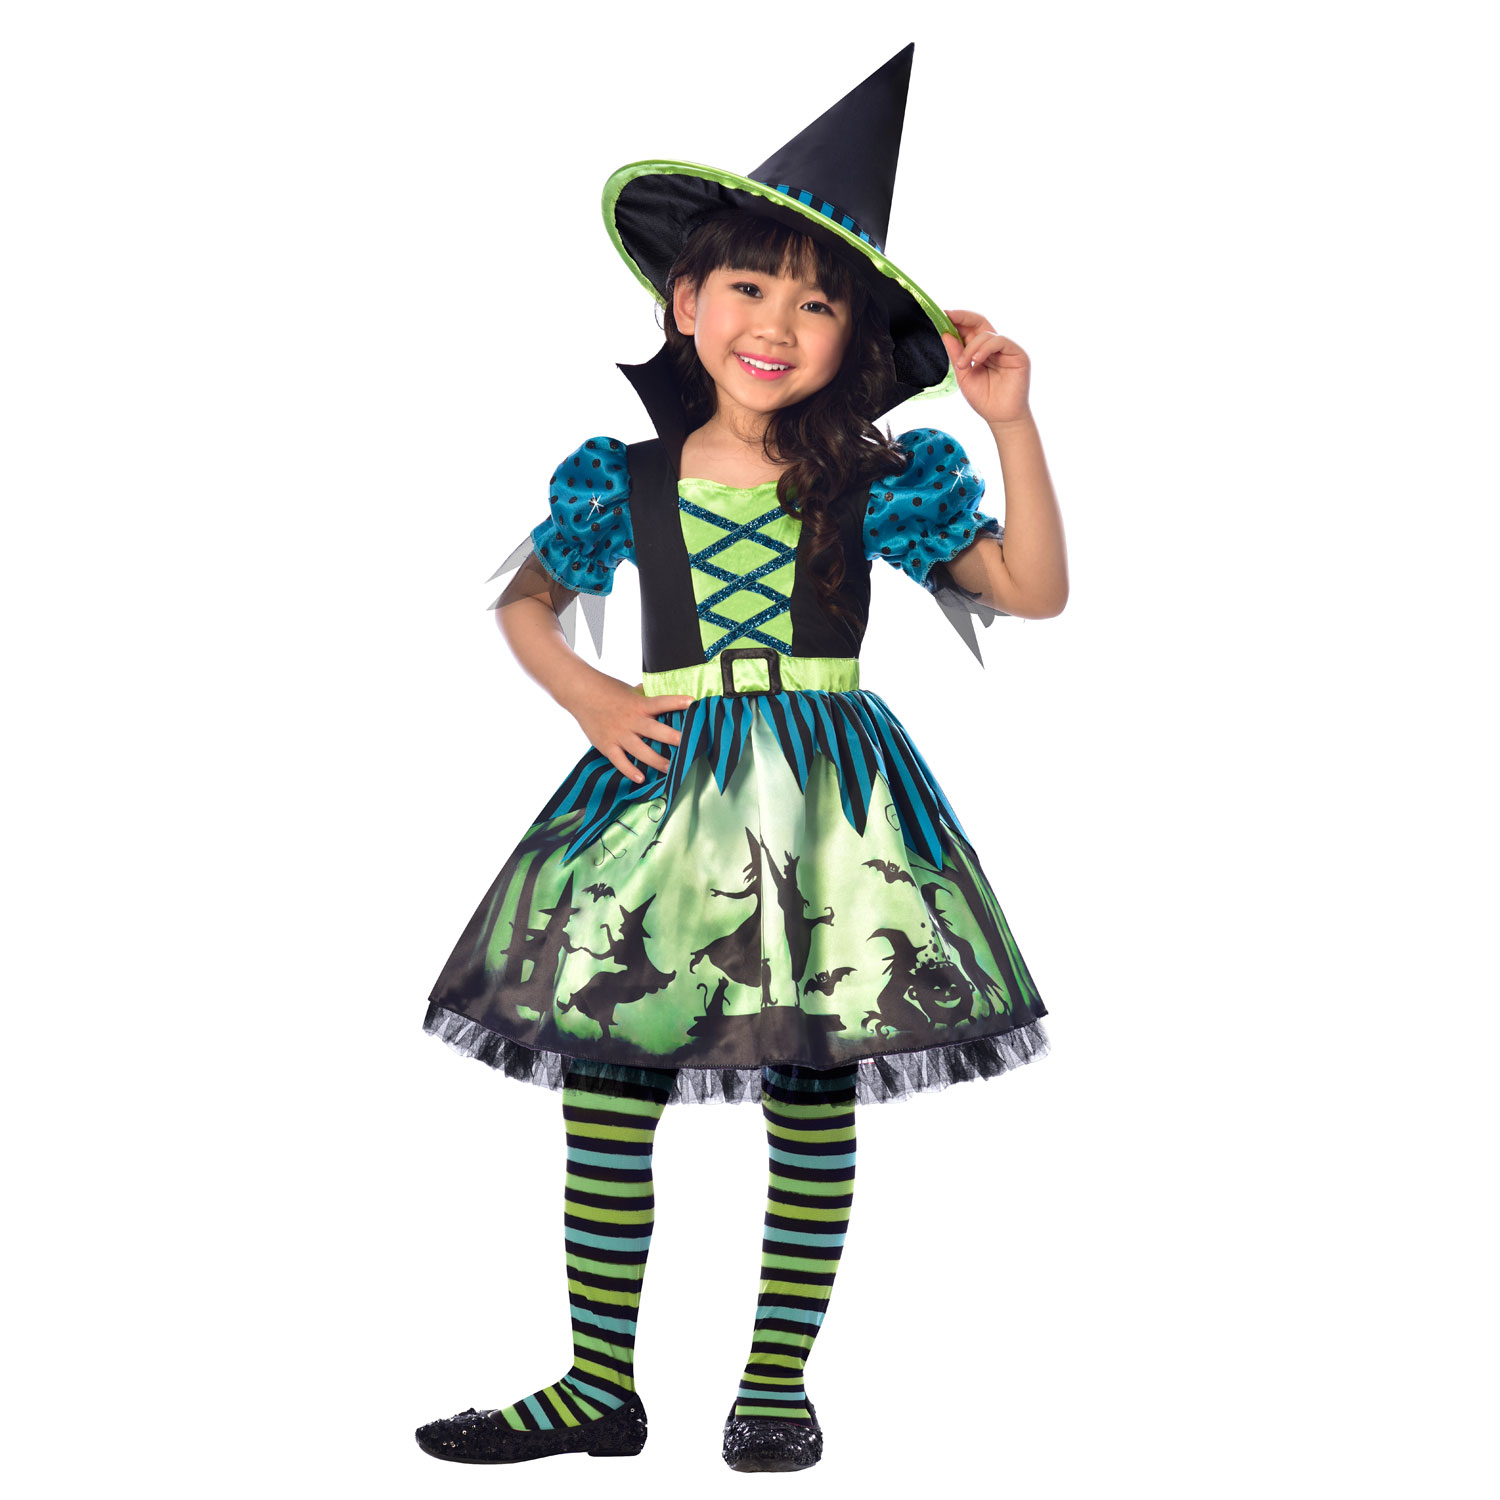 Hocus Pocus Witch Costume - Age 4-6 Years - 1 PC : Amscan International